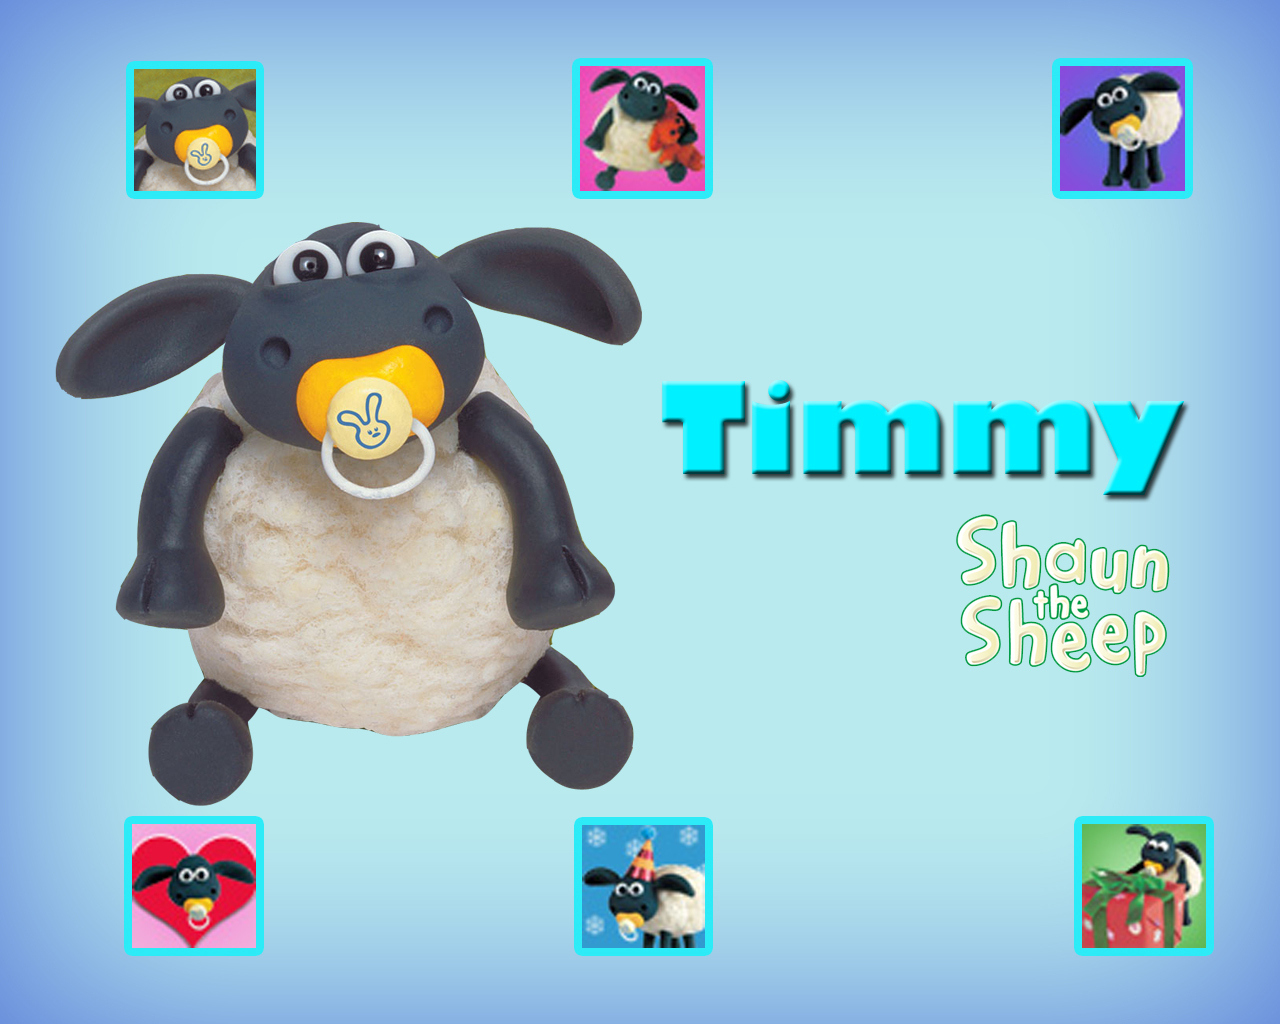 Baby Timmy Shaun Sheep on Fletcher Kate Old For Kids Shaun Baby Lamb Timmy From Fleecedflickr Is